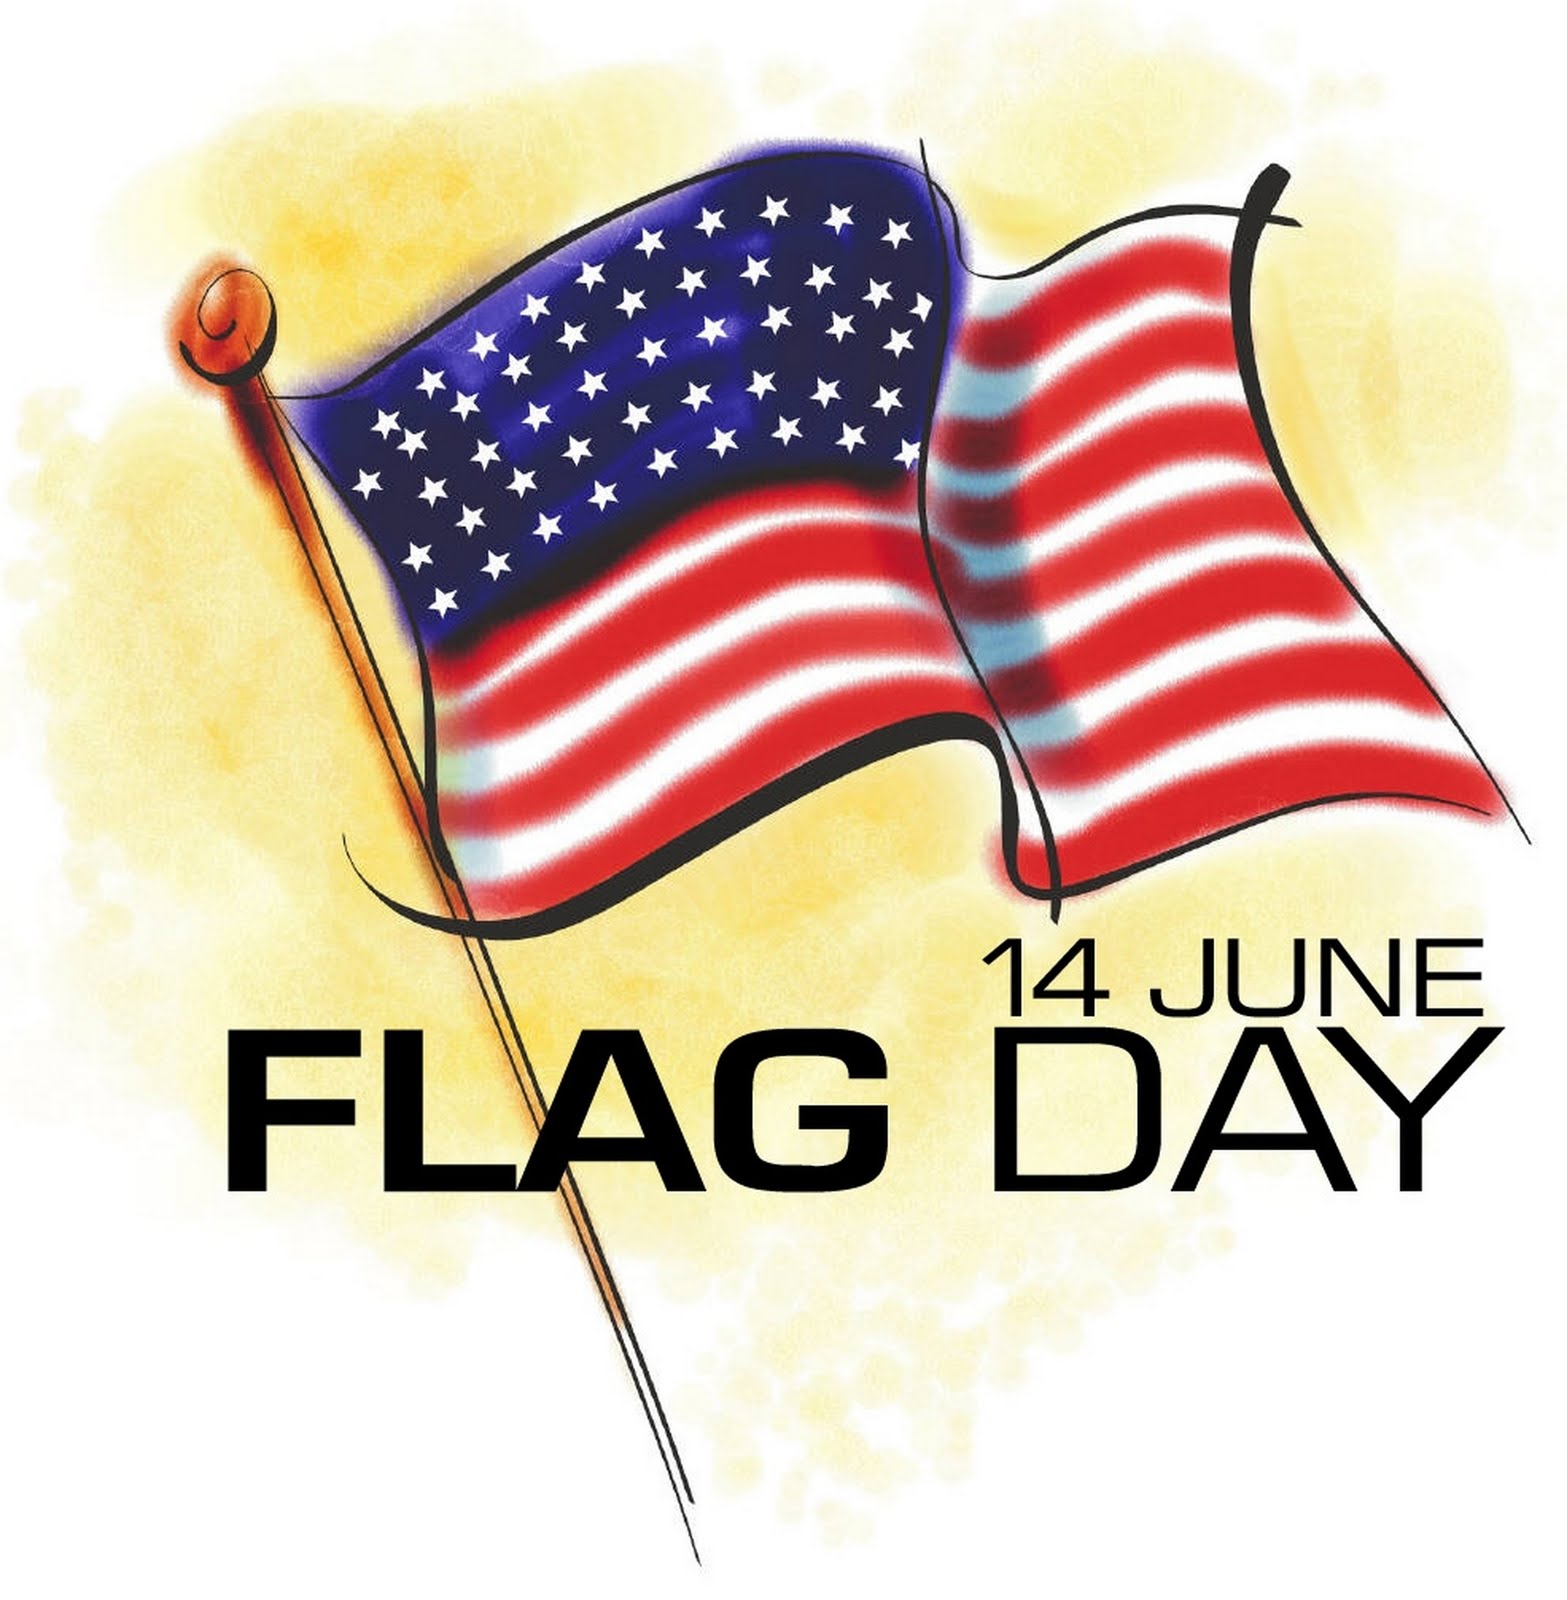 Public Domain Clip Art Photos And Images  Flag Day June 14th